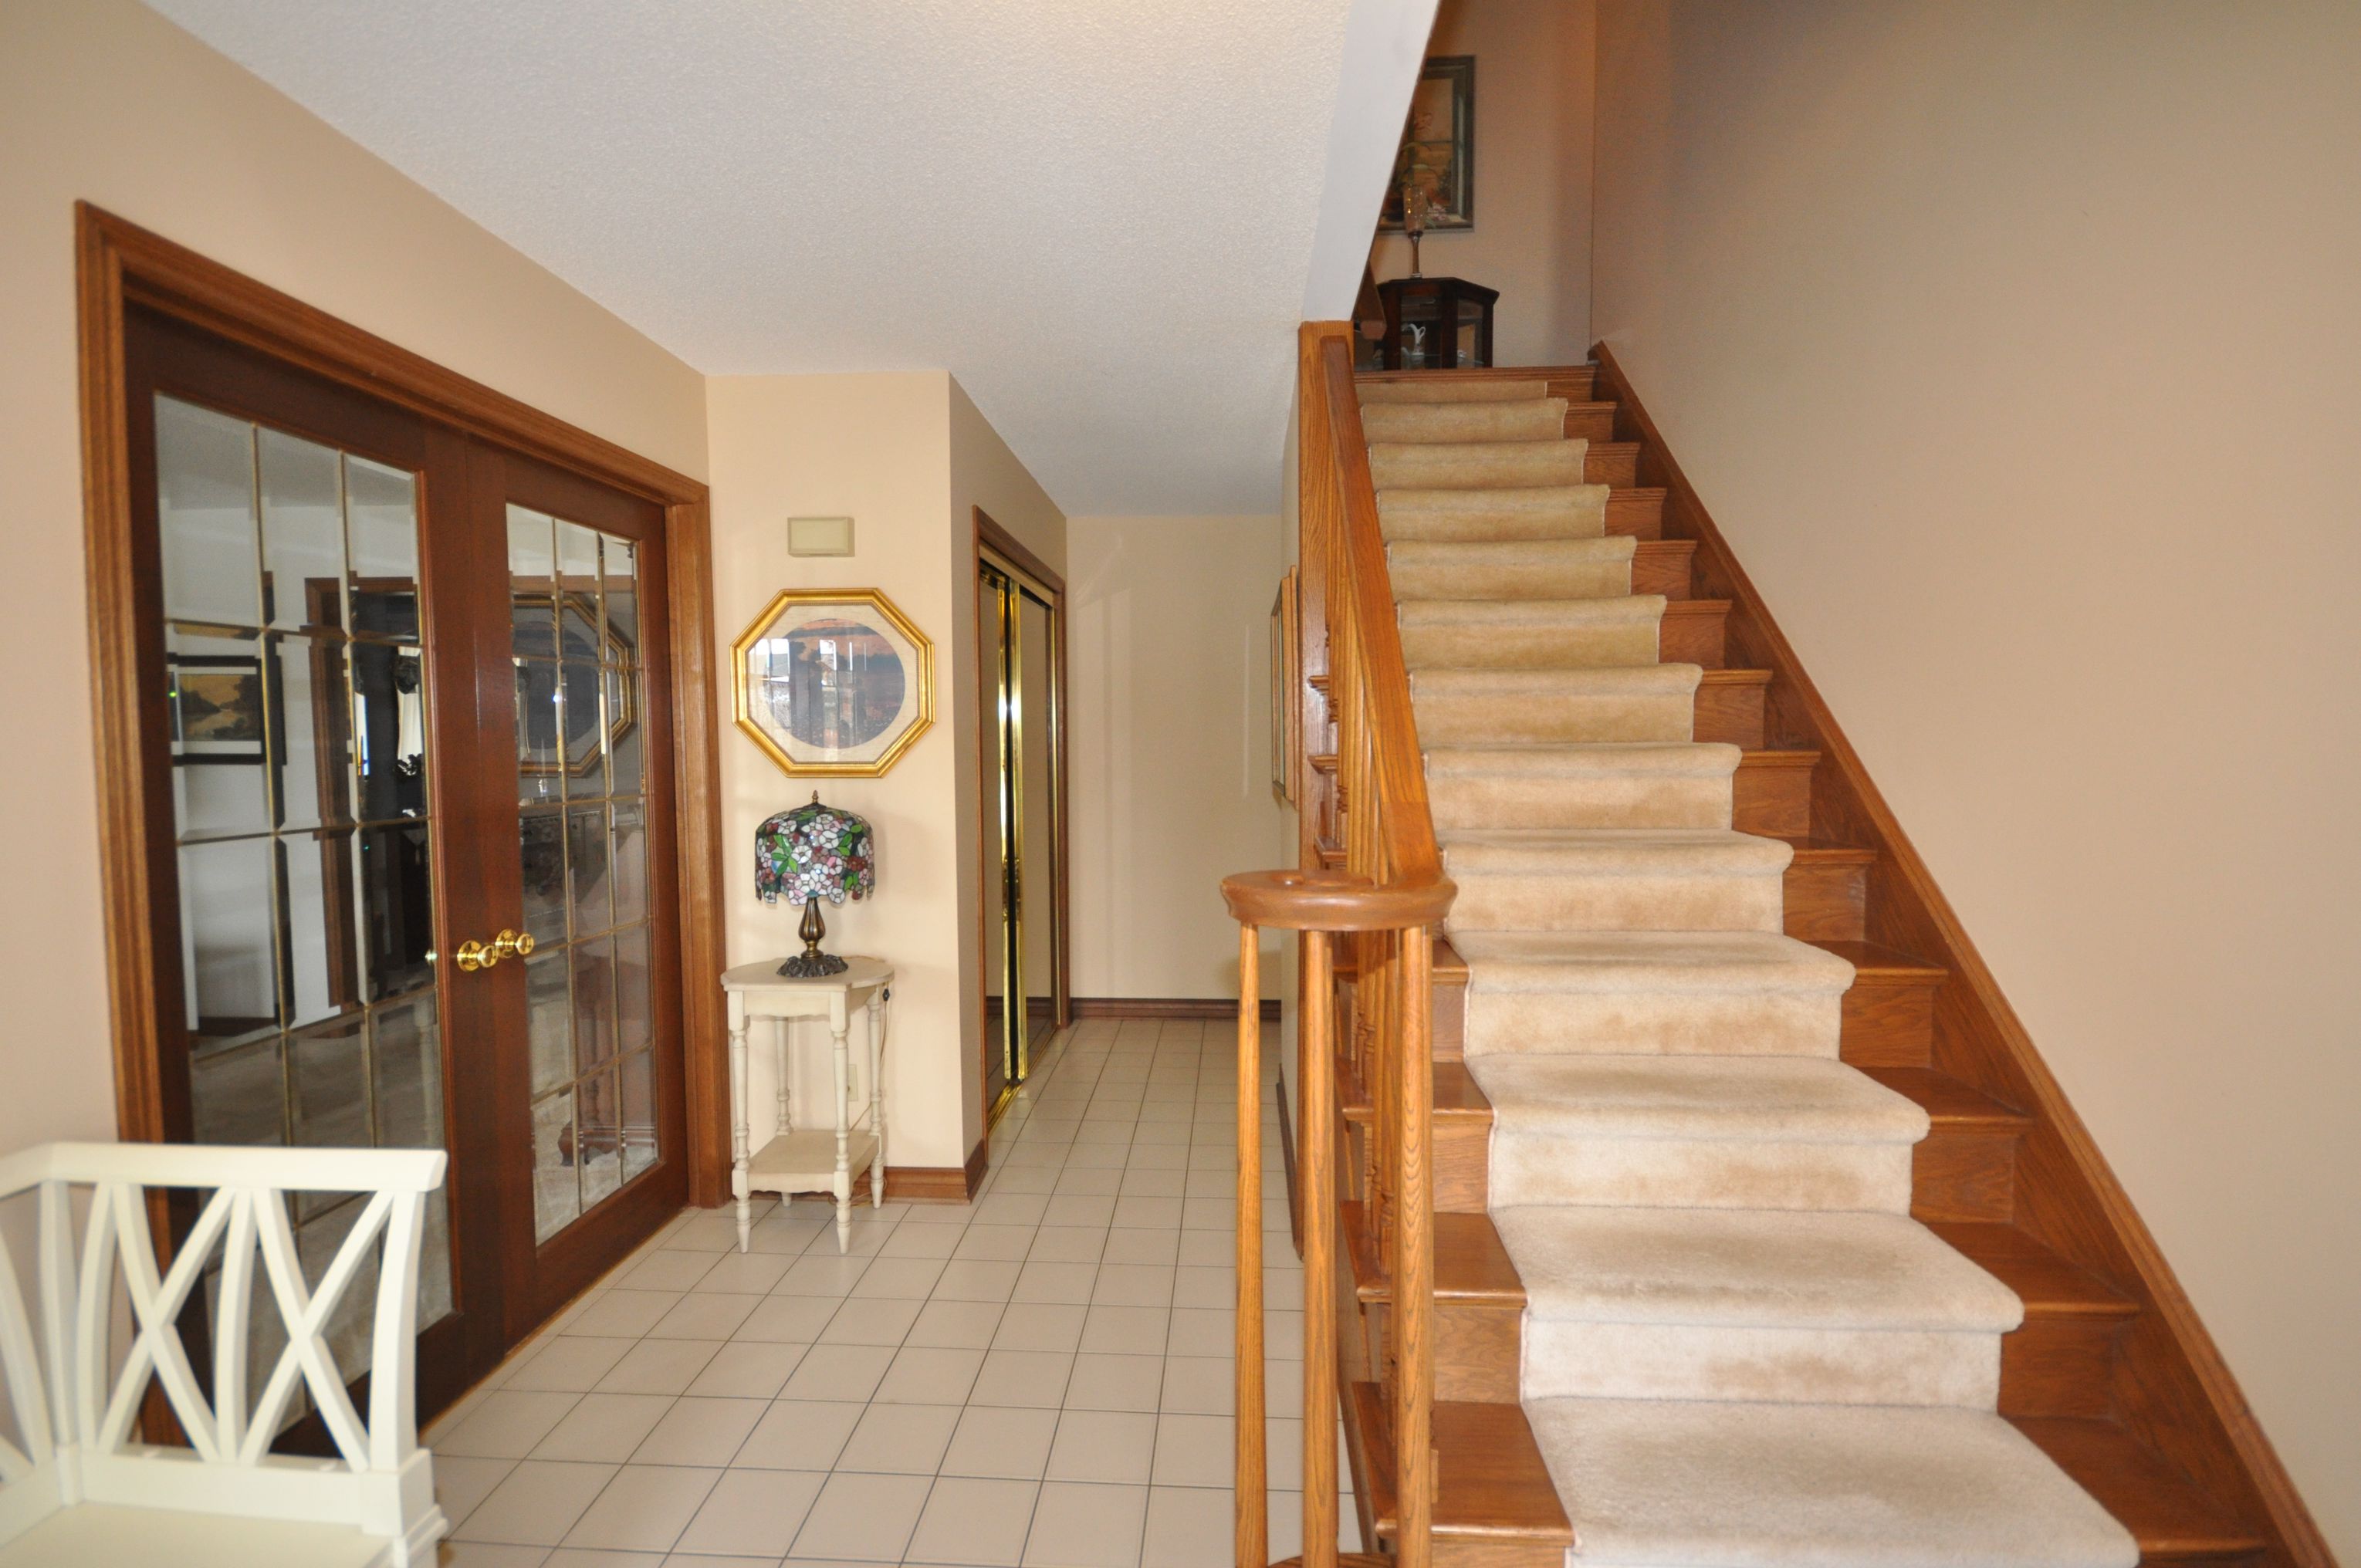 Oak staircase leading upstairs